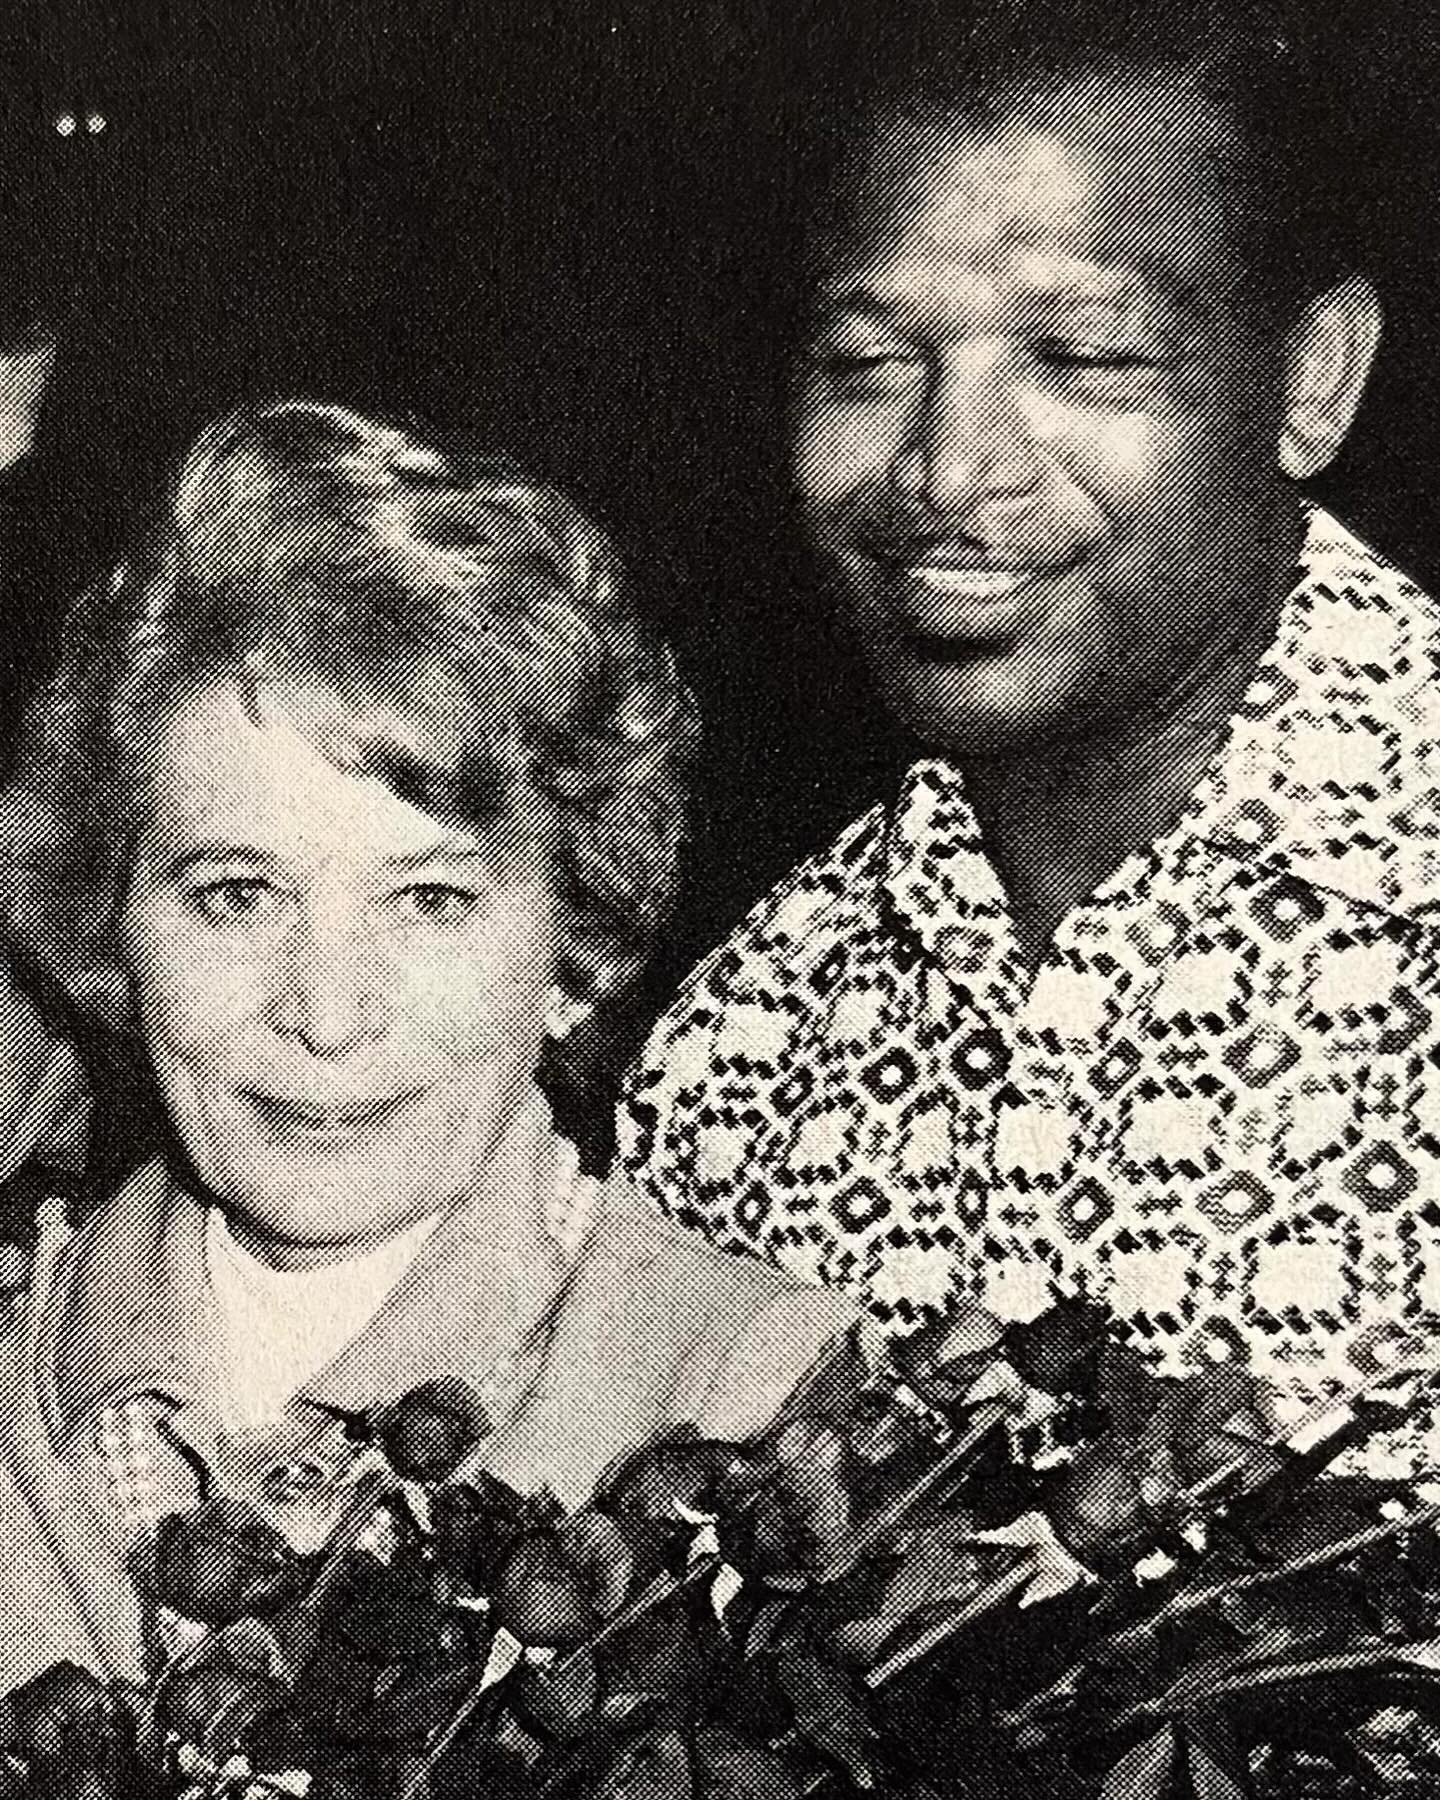 Olympic Auditorium promoter Aileen Eaton with all-time boxing great Sugar Ray Robinson. She promoted one of Robinson&rsquo;s world championship fights vs. Gene Fullmer at the now demolished LA Sports Arena. #18thandgrand #boxing #lahistory #boxinghis